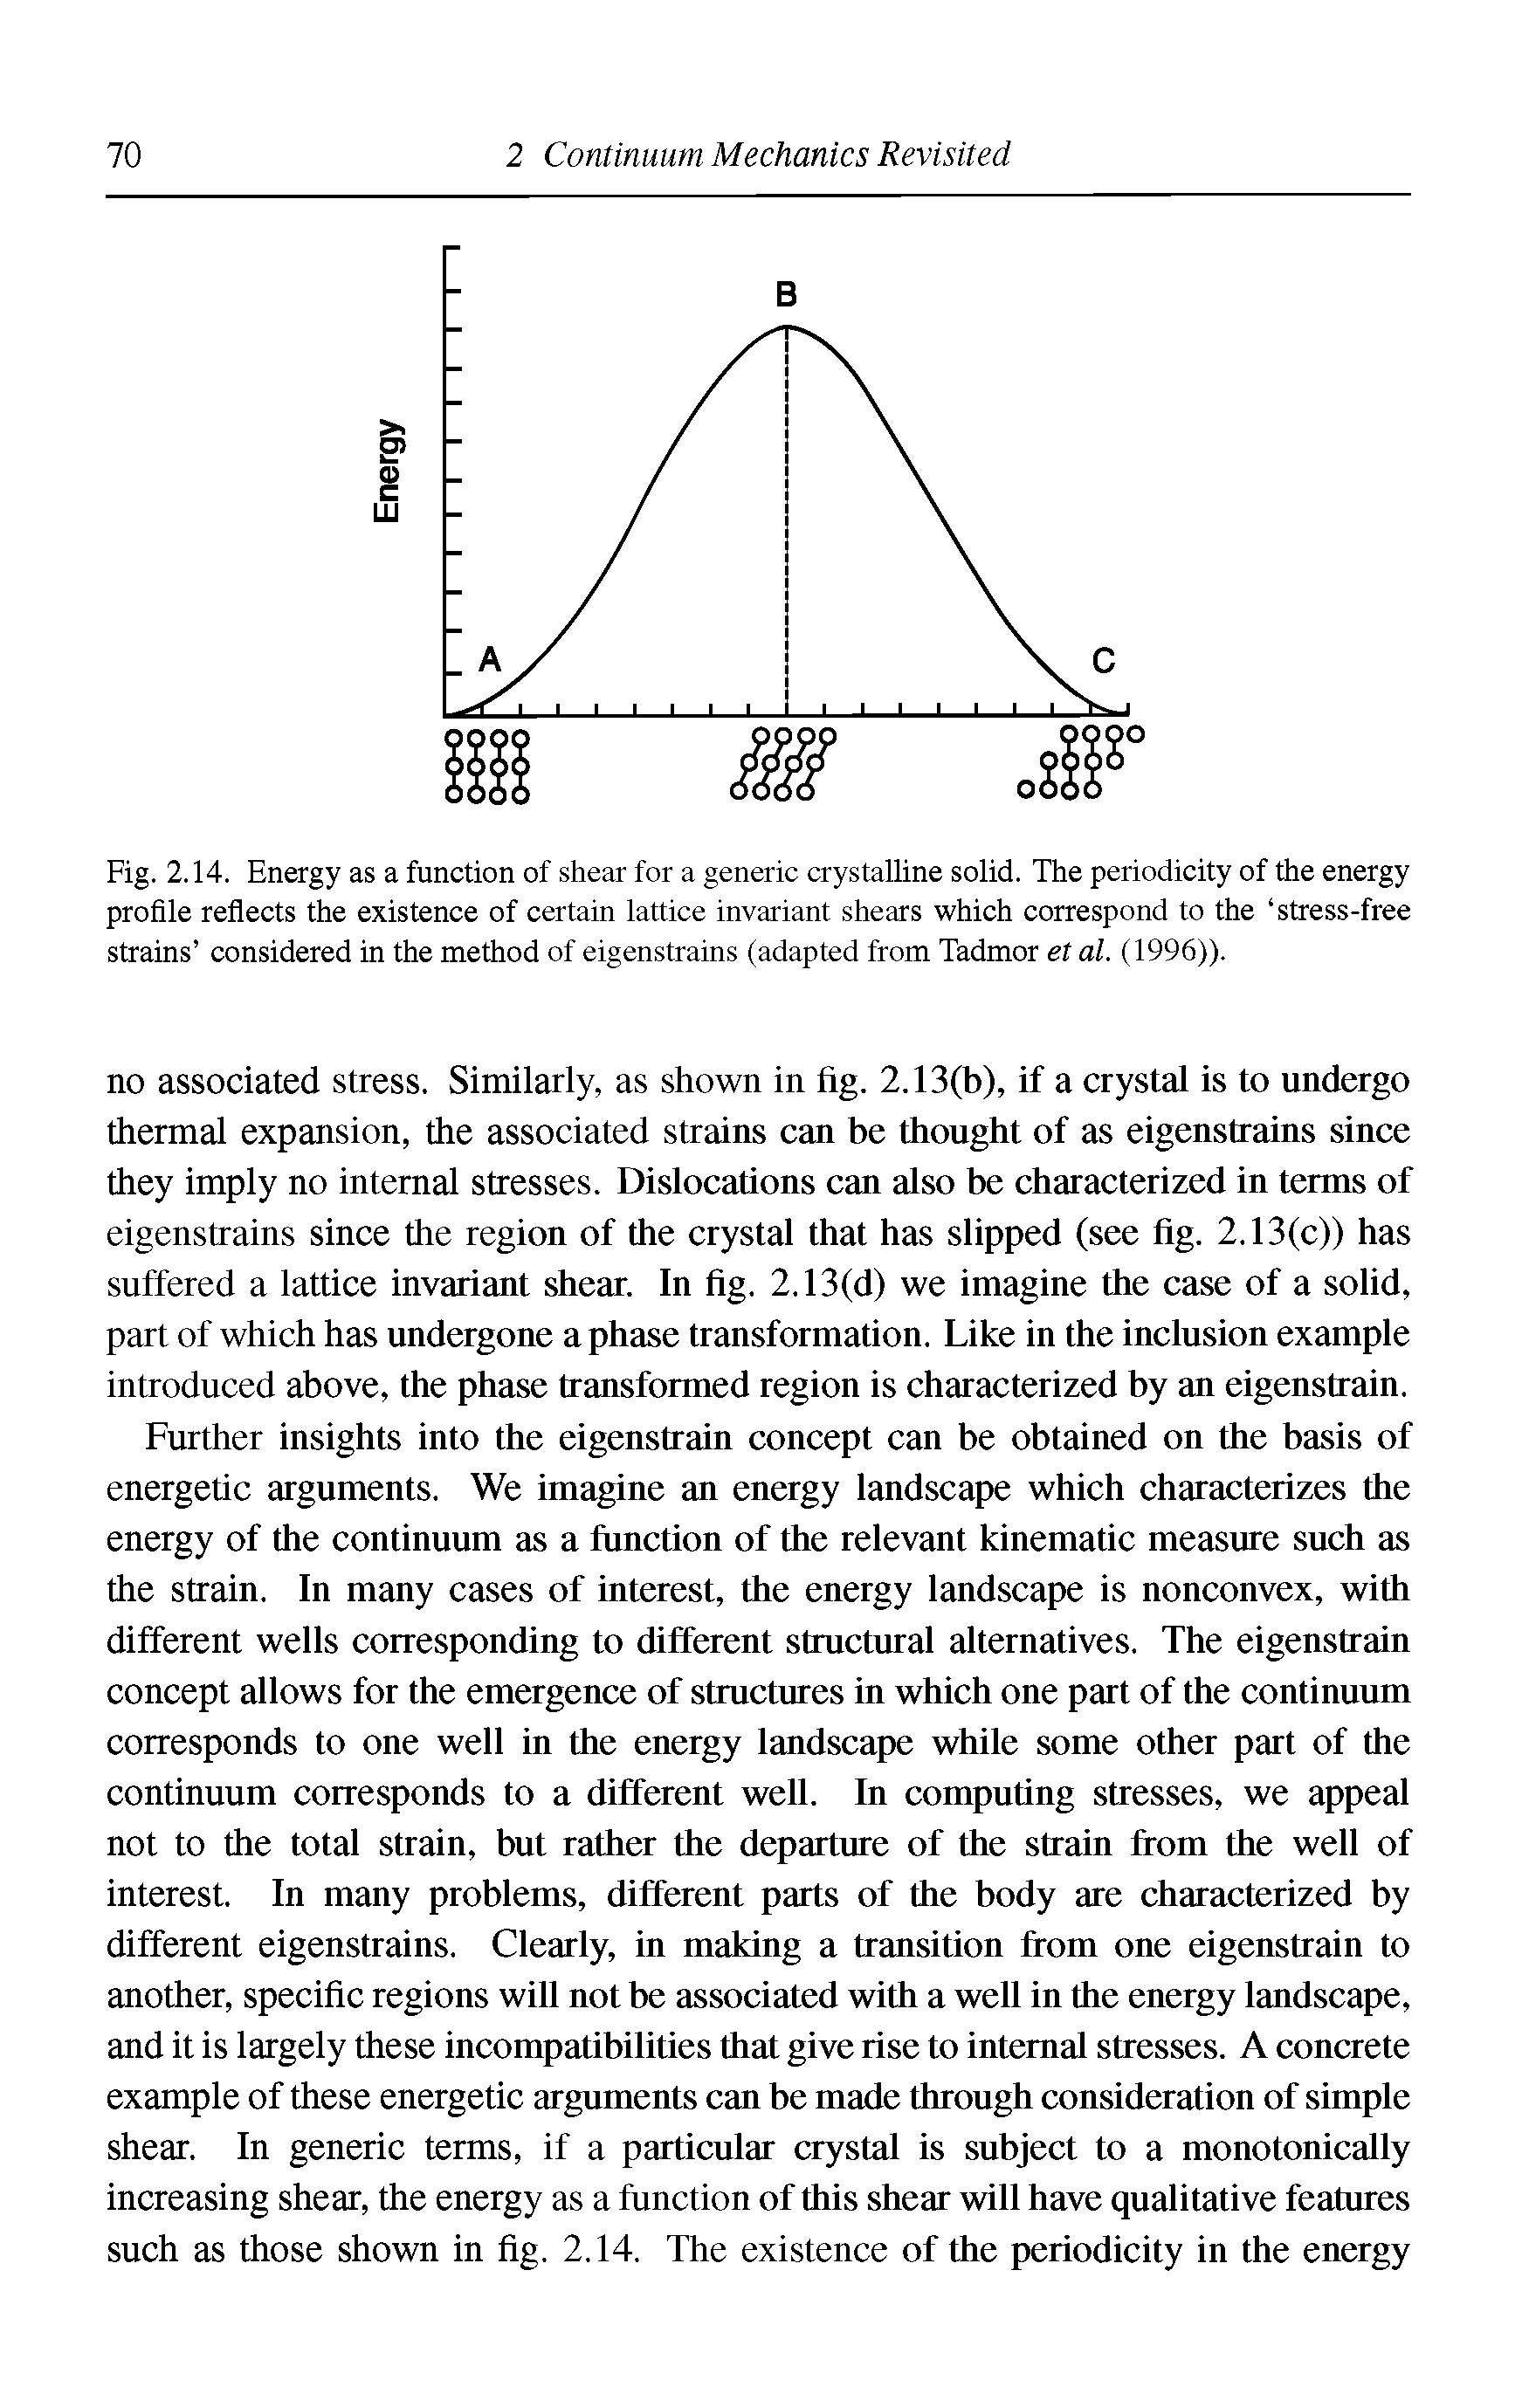 Fig. 2.14. Energy as a function of shear for a generic crystalline solid. The periodicity of the energy profile reflects the existence of certain lattice invariant shears which correspond to the stress-free strains considered in the method of eigenstrains (adapted from Tadmor et al. (1996)).